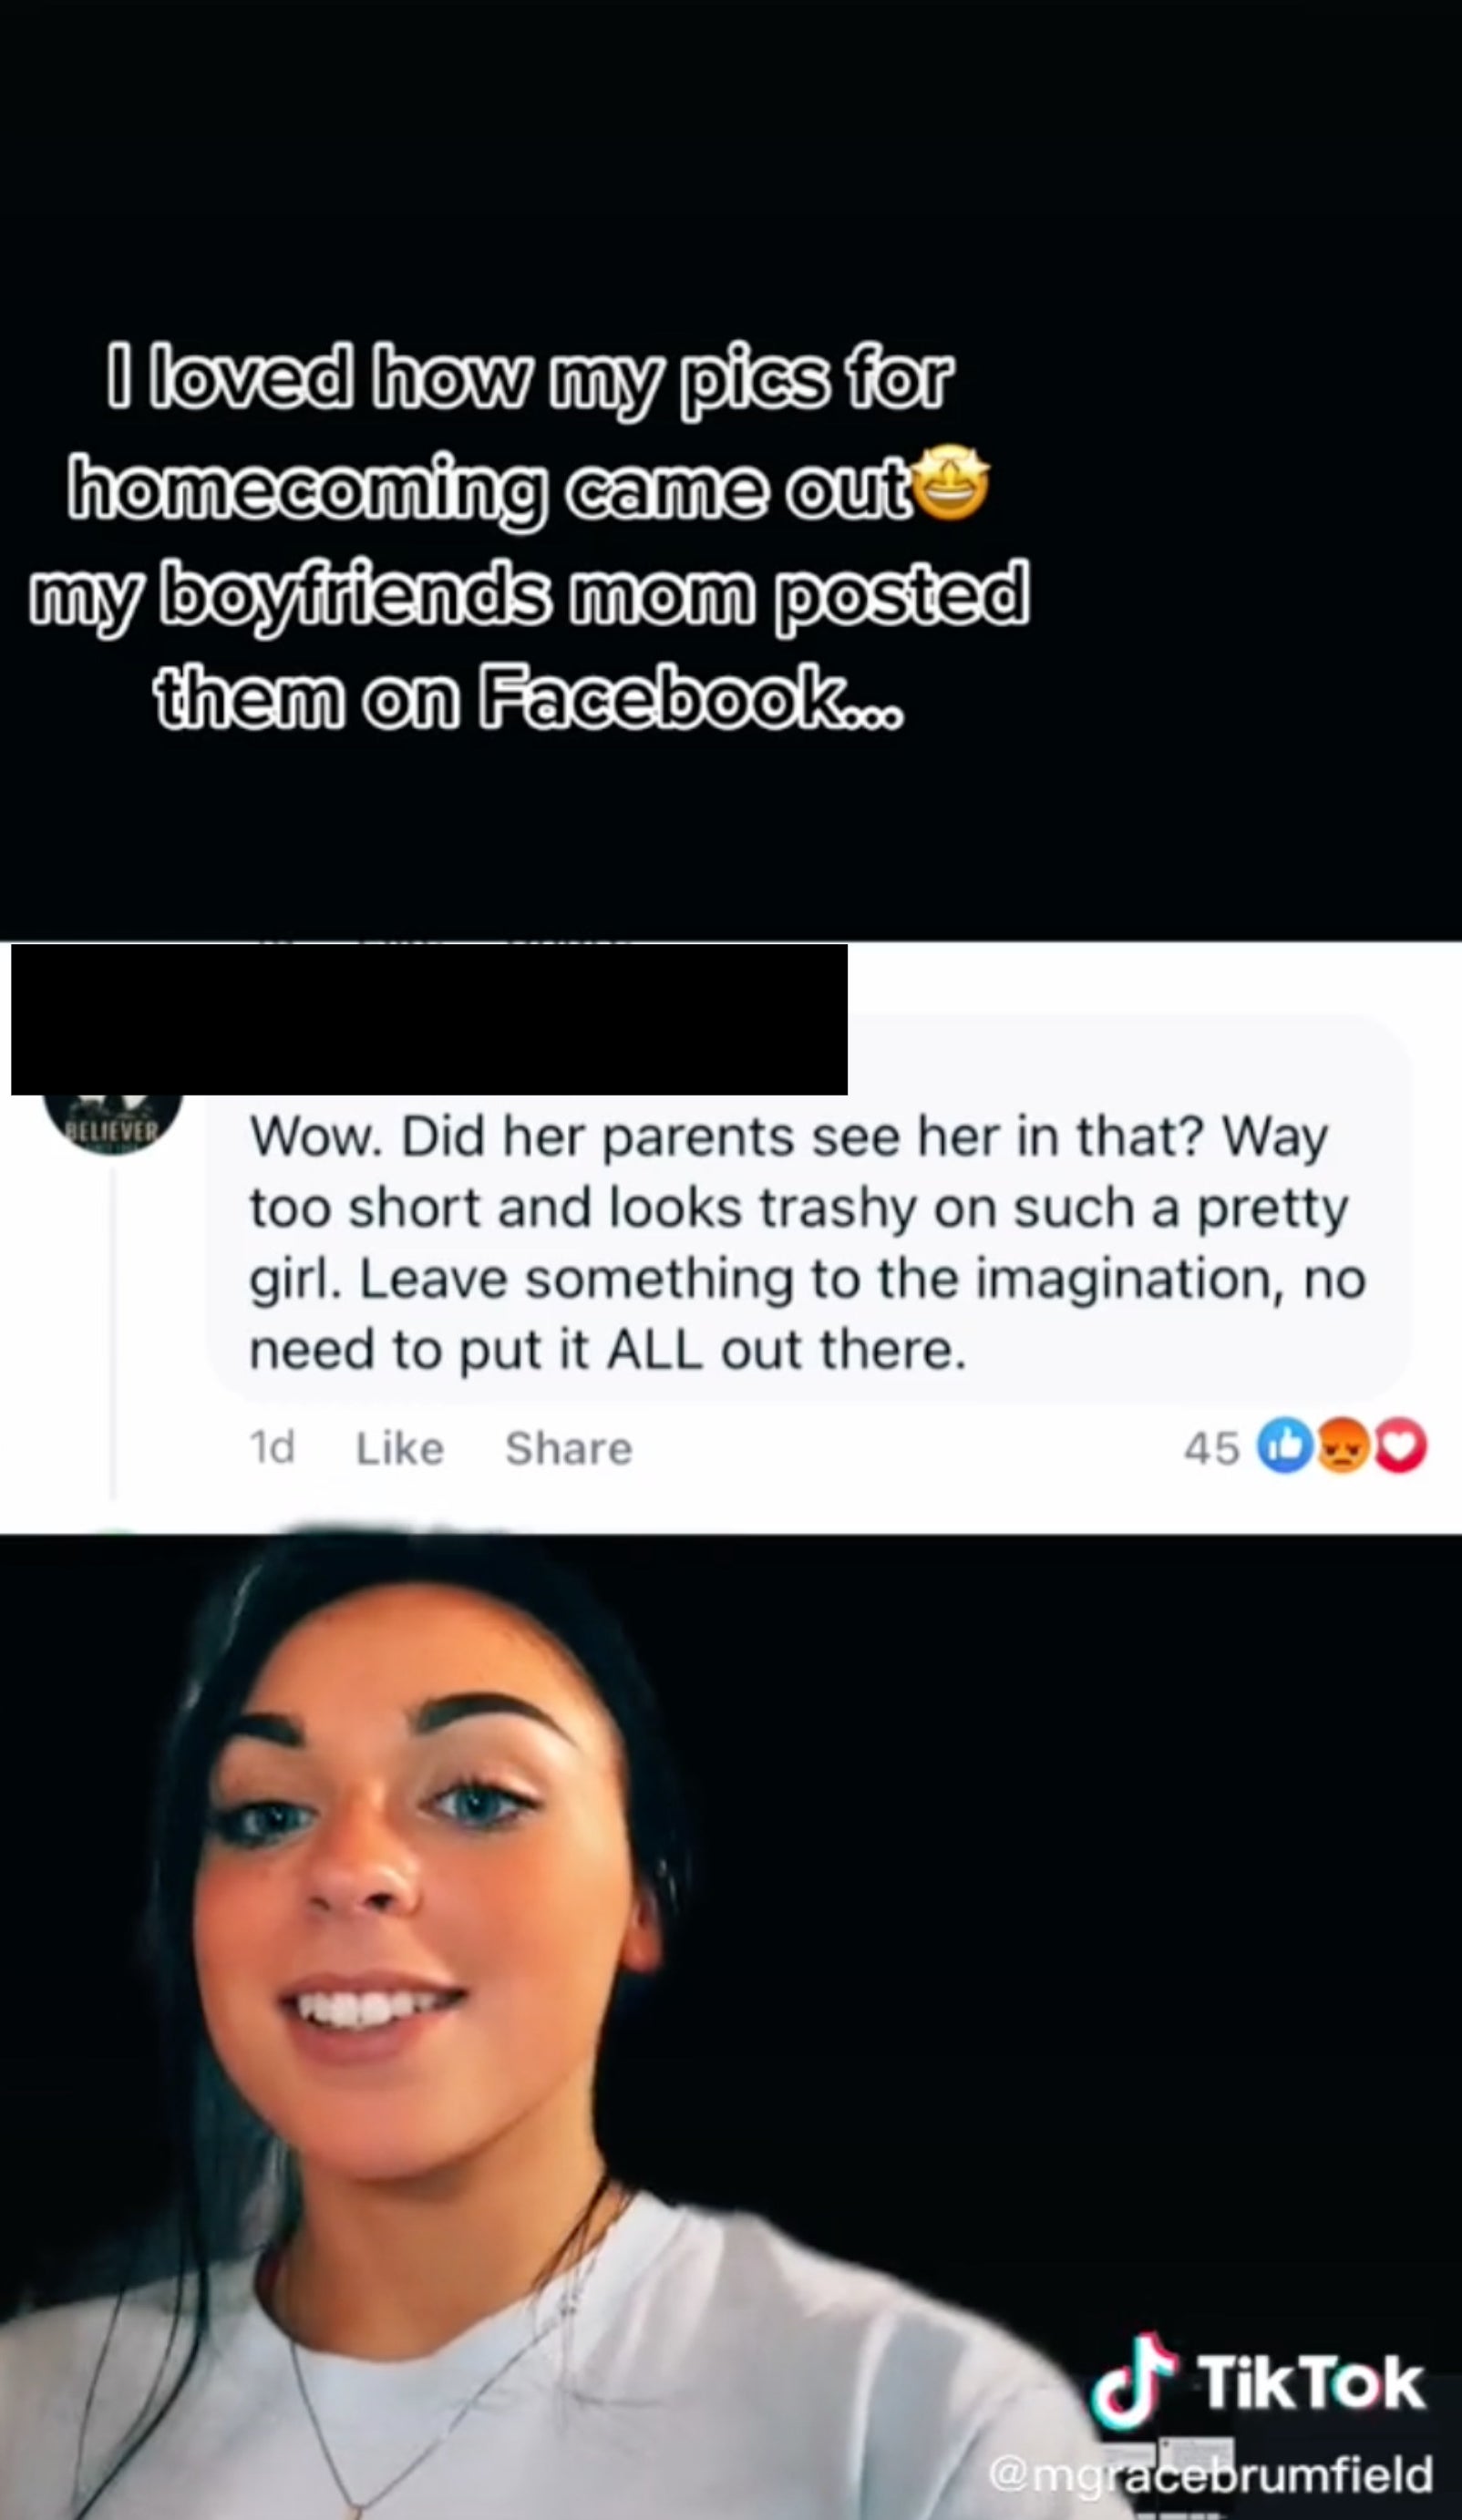 Grace smiling below the comment "Wow, did her parents see her in that? Way too short and looks trashy on such a pretty girl. Leave something to the imagination, no need to put it ALL out there"